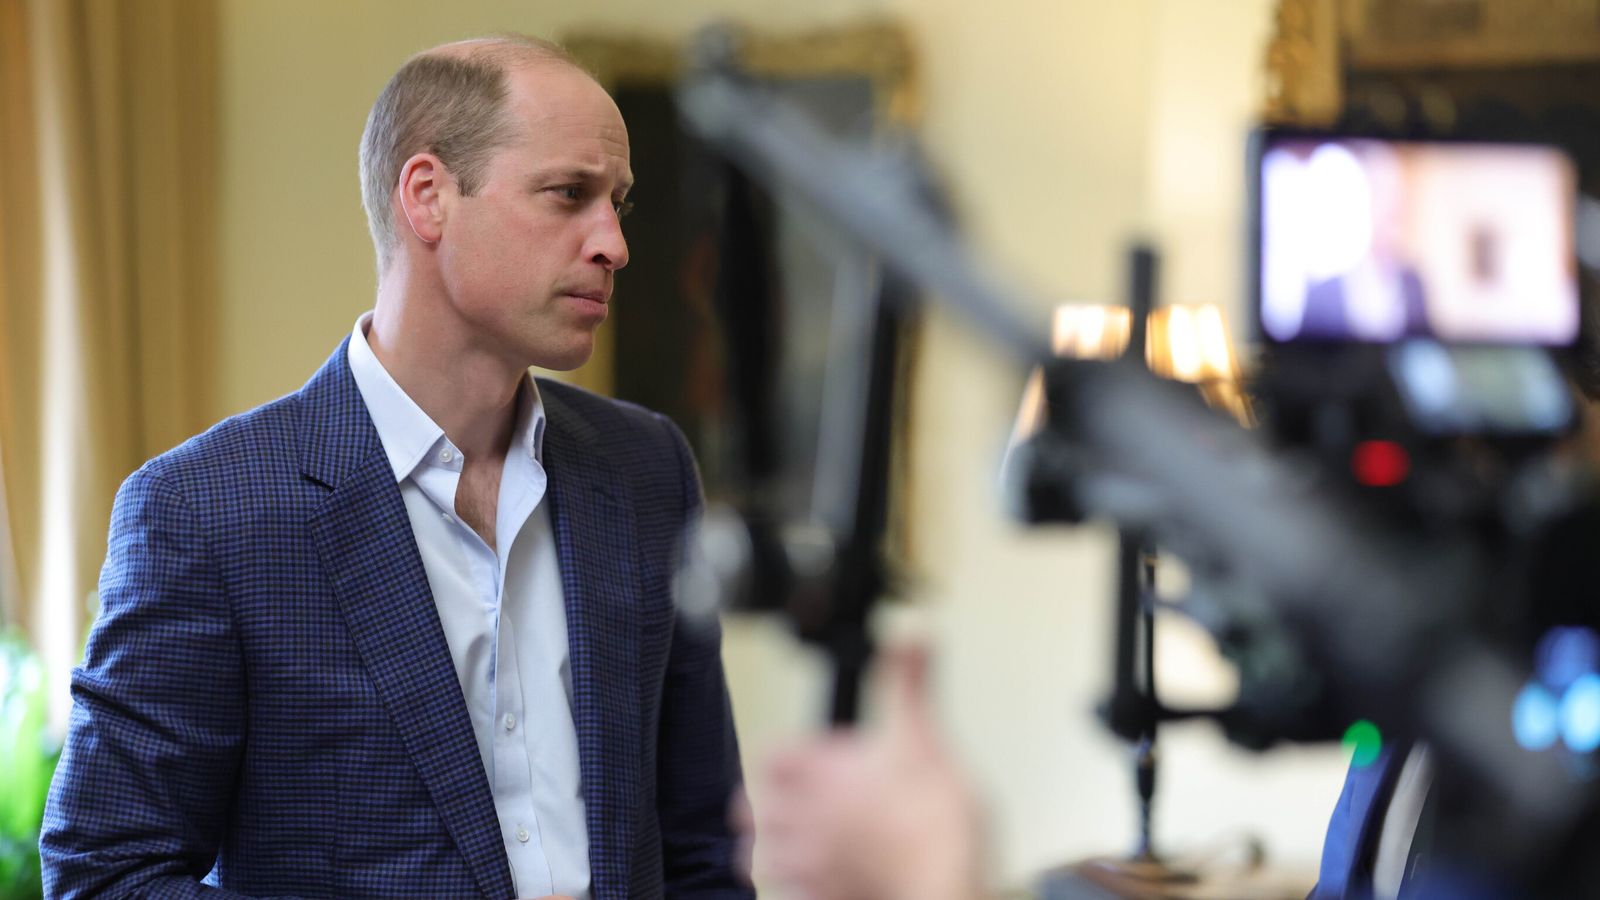 Prince William’s project to eradicate homelessness to be focus of new documentary | UK News